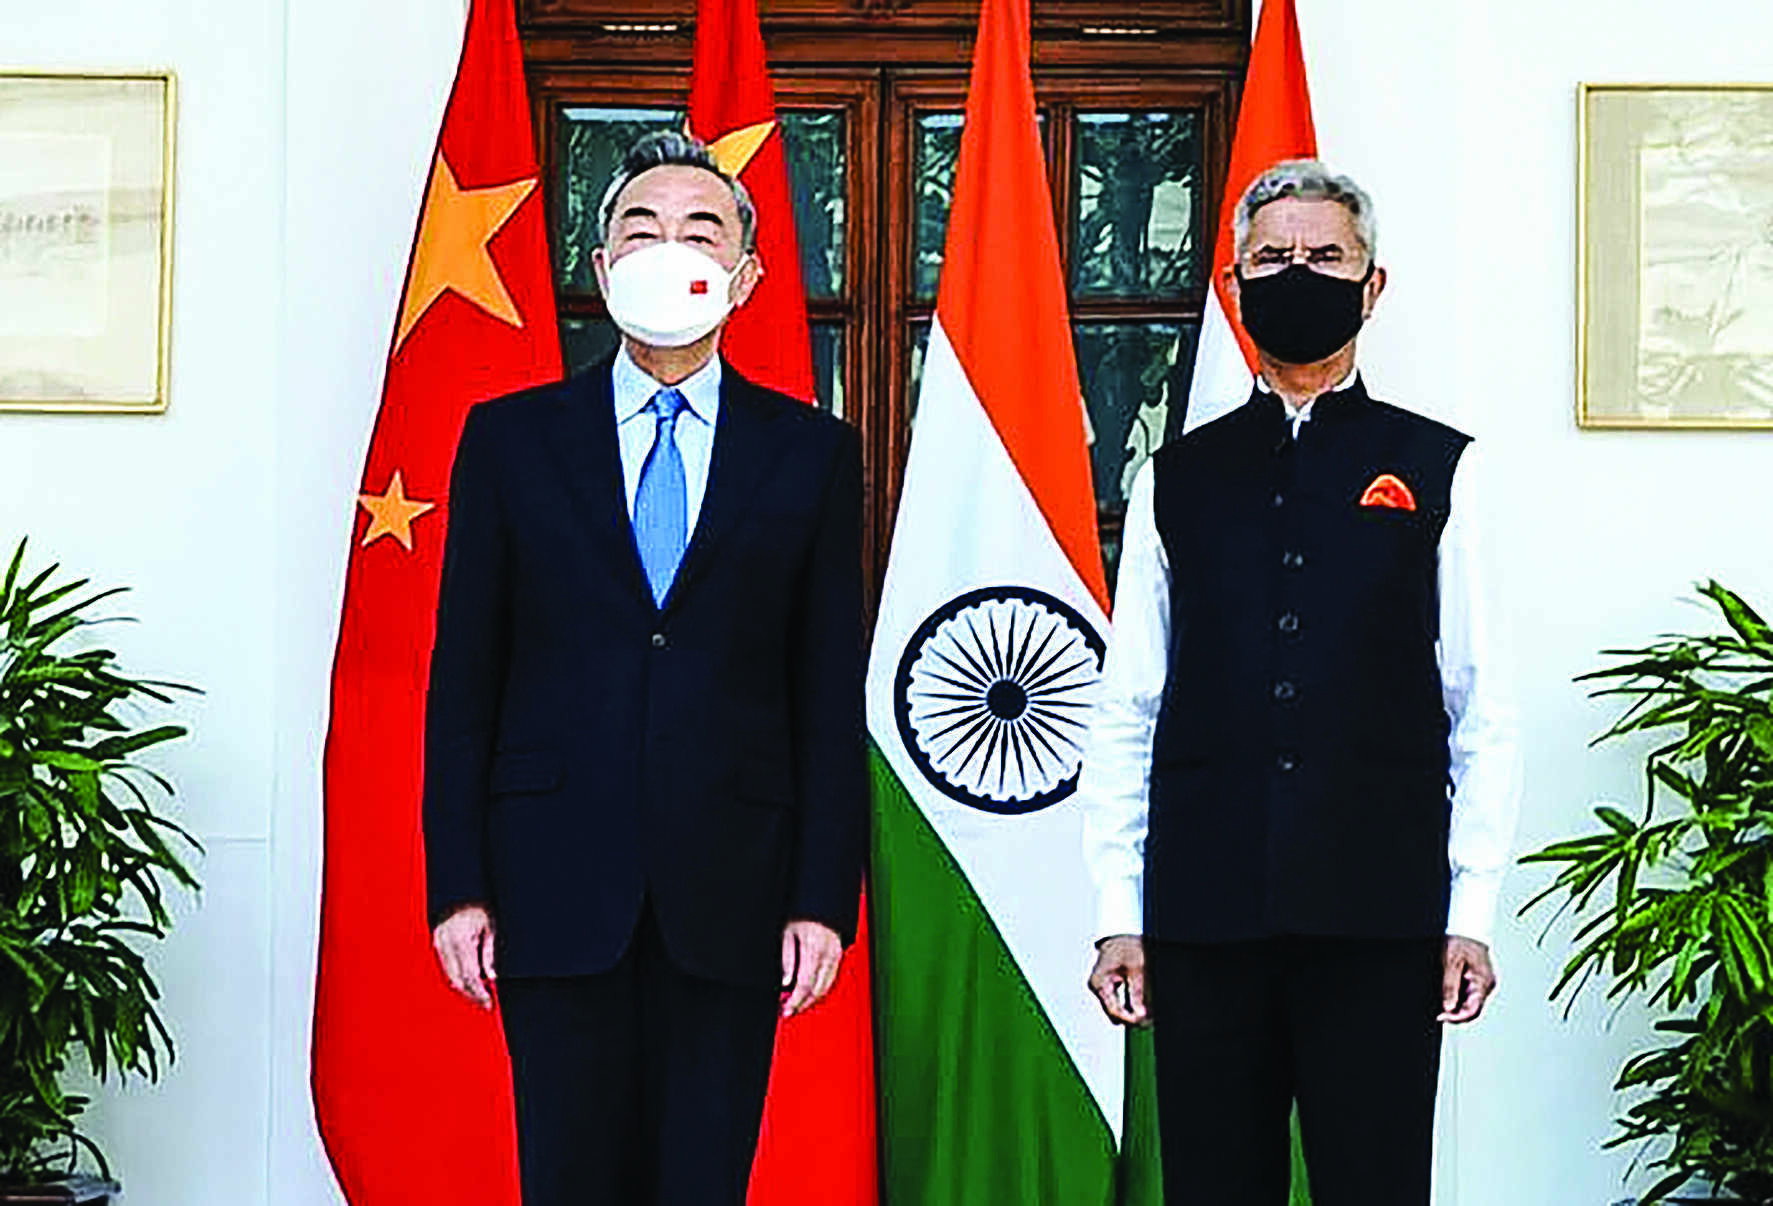 Our relation not normal, work in progress, India tells China